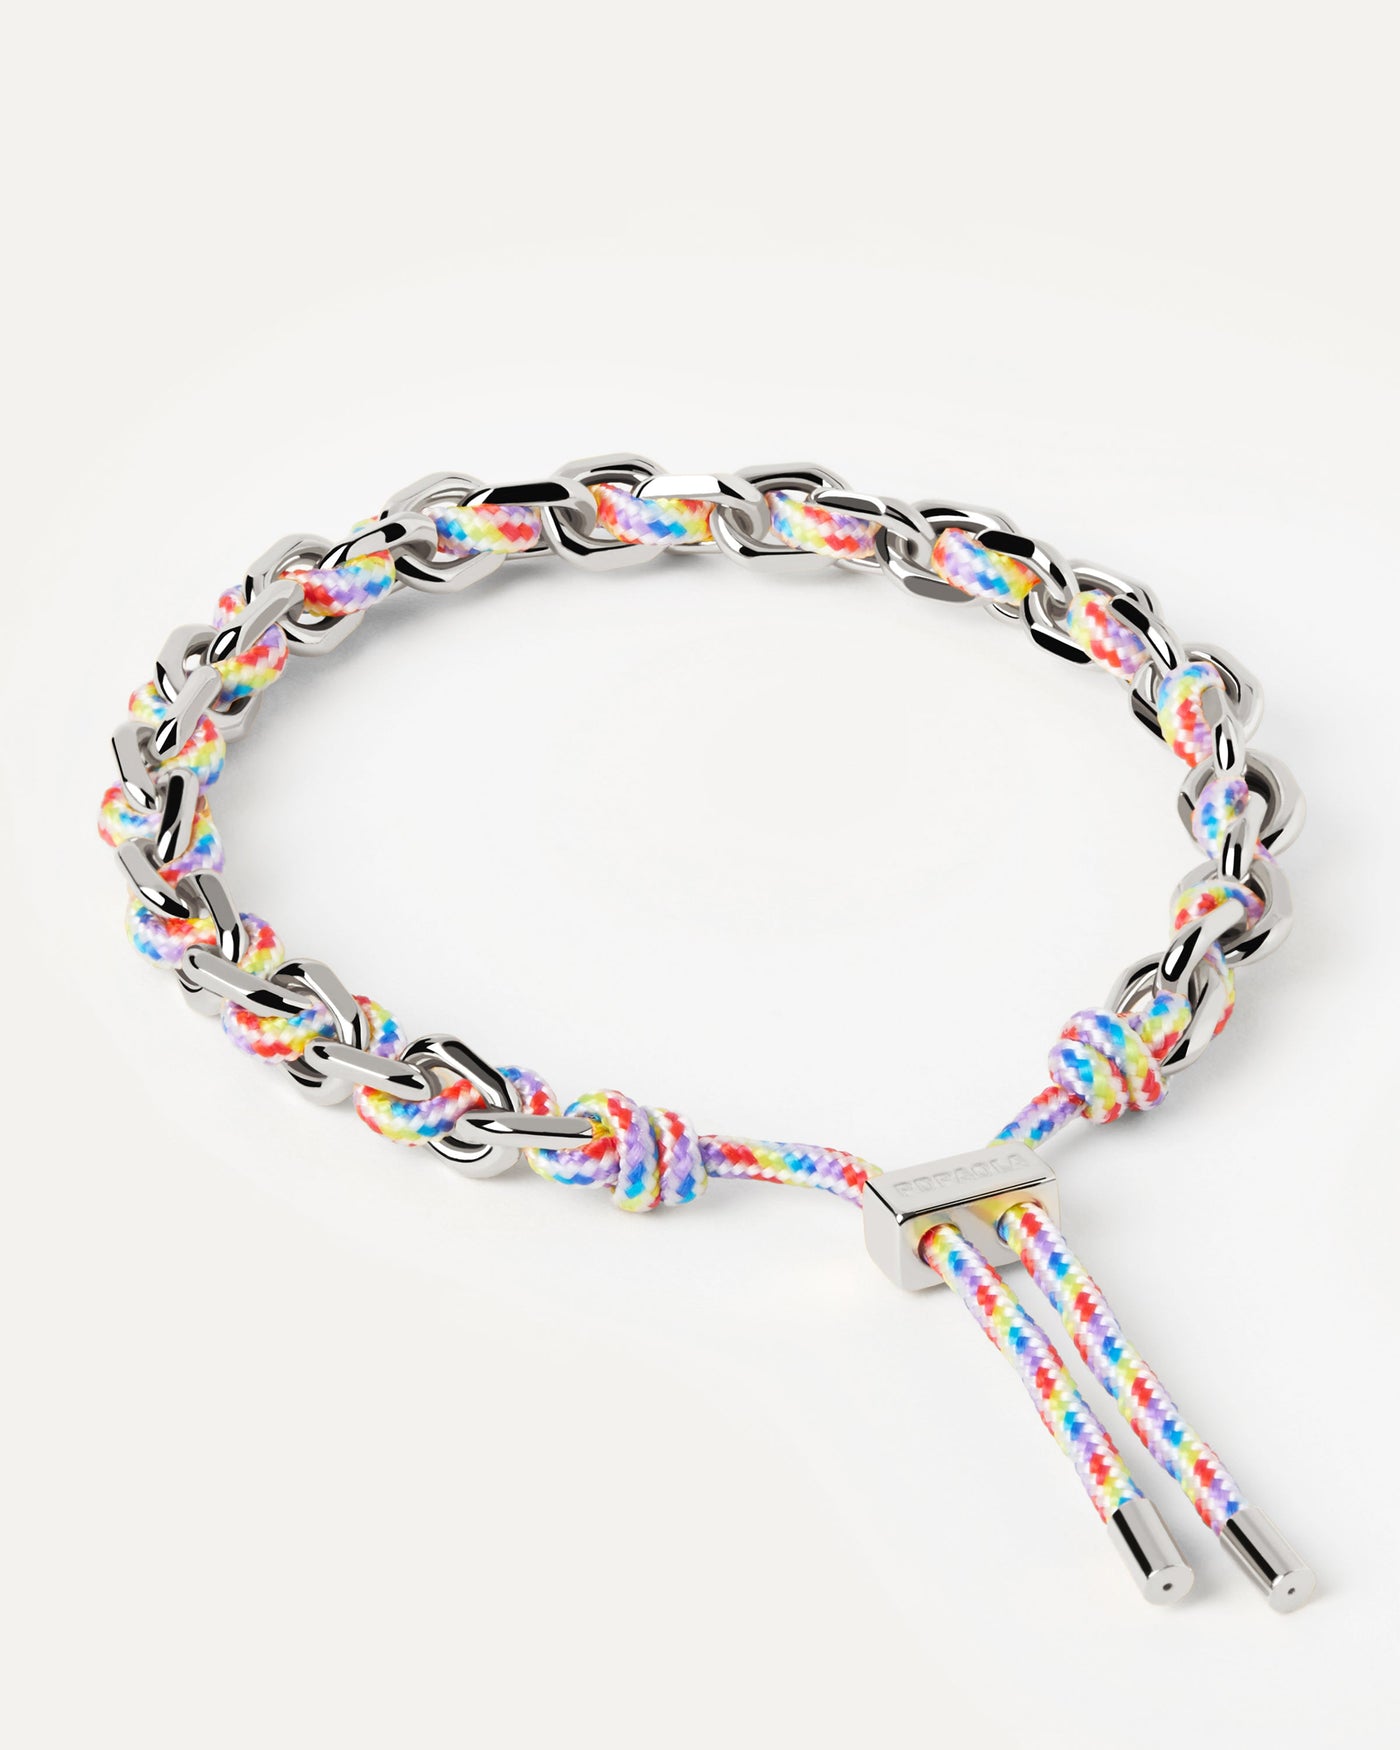 2023 Selection | Prisma Rope and Chain Silver Bracelet. Silver chain bracelet with a multicolor rope adjustable sliding clasp. Get the latest arrival from PDPAOLA. Place your order safely and get this Best Seller. Free Shipping.